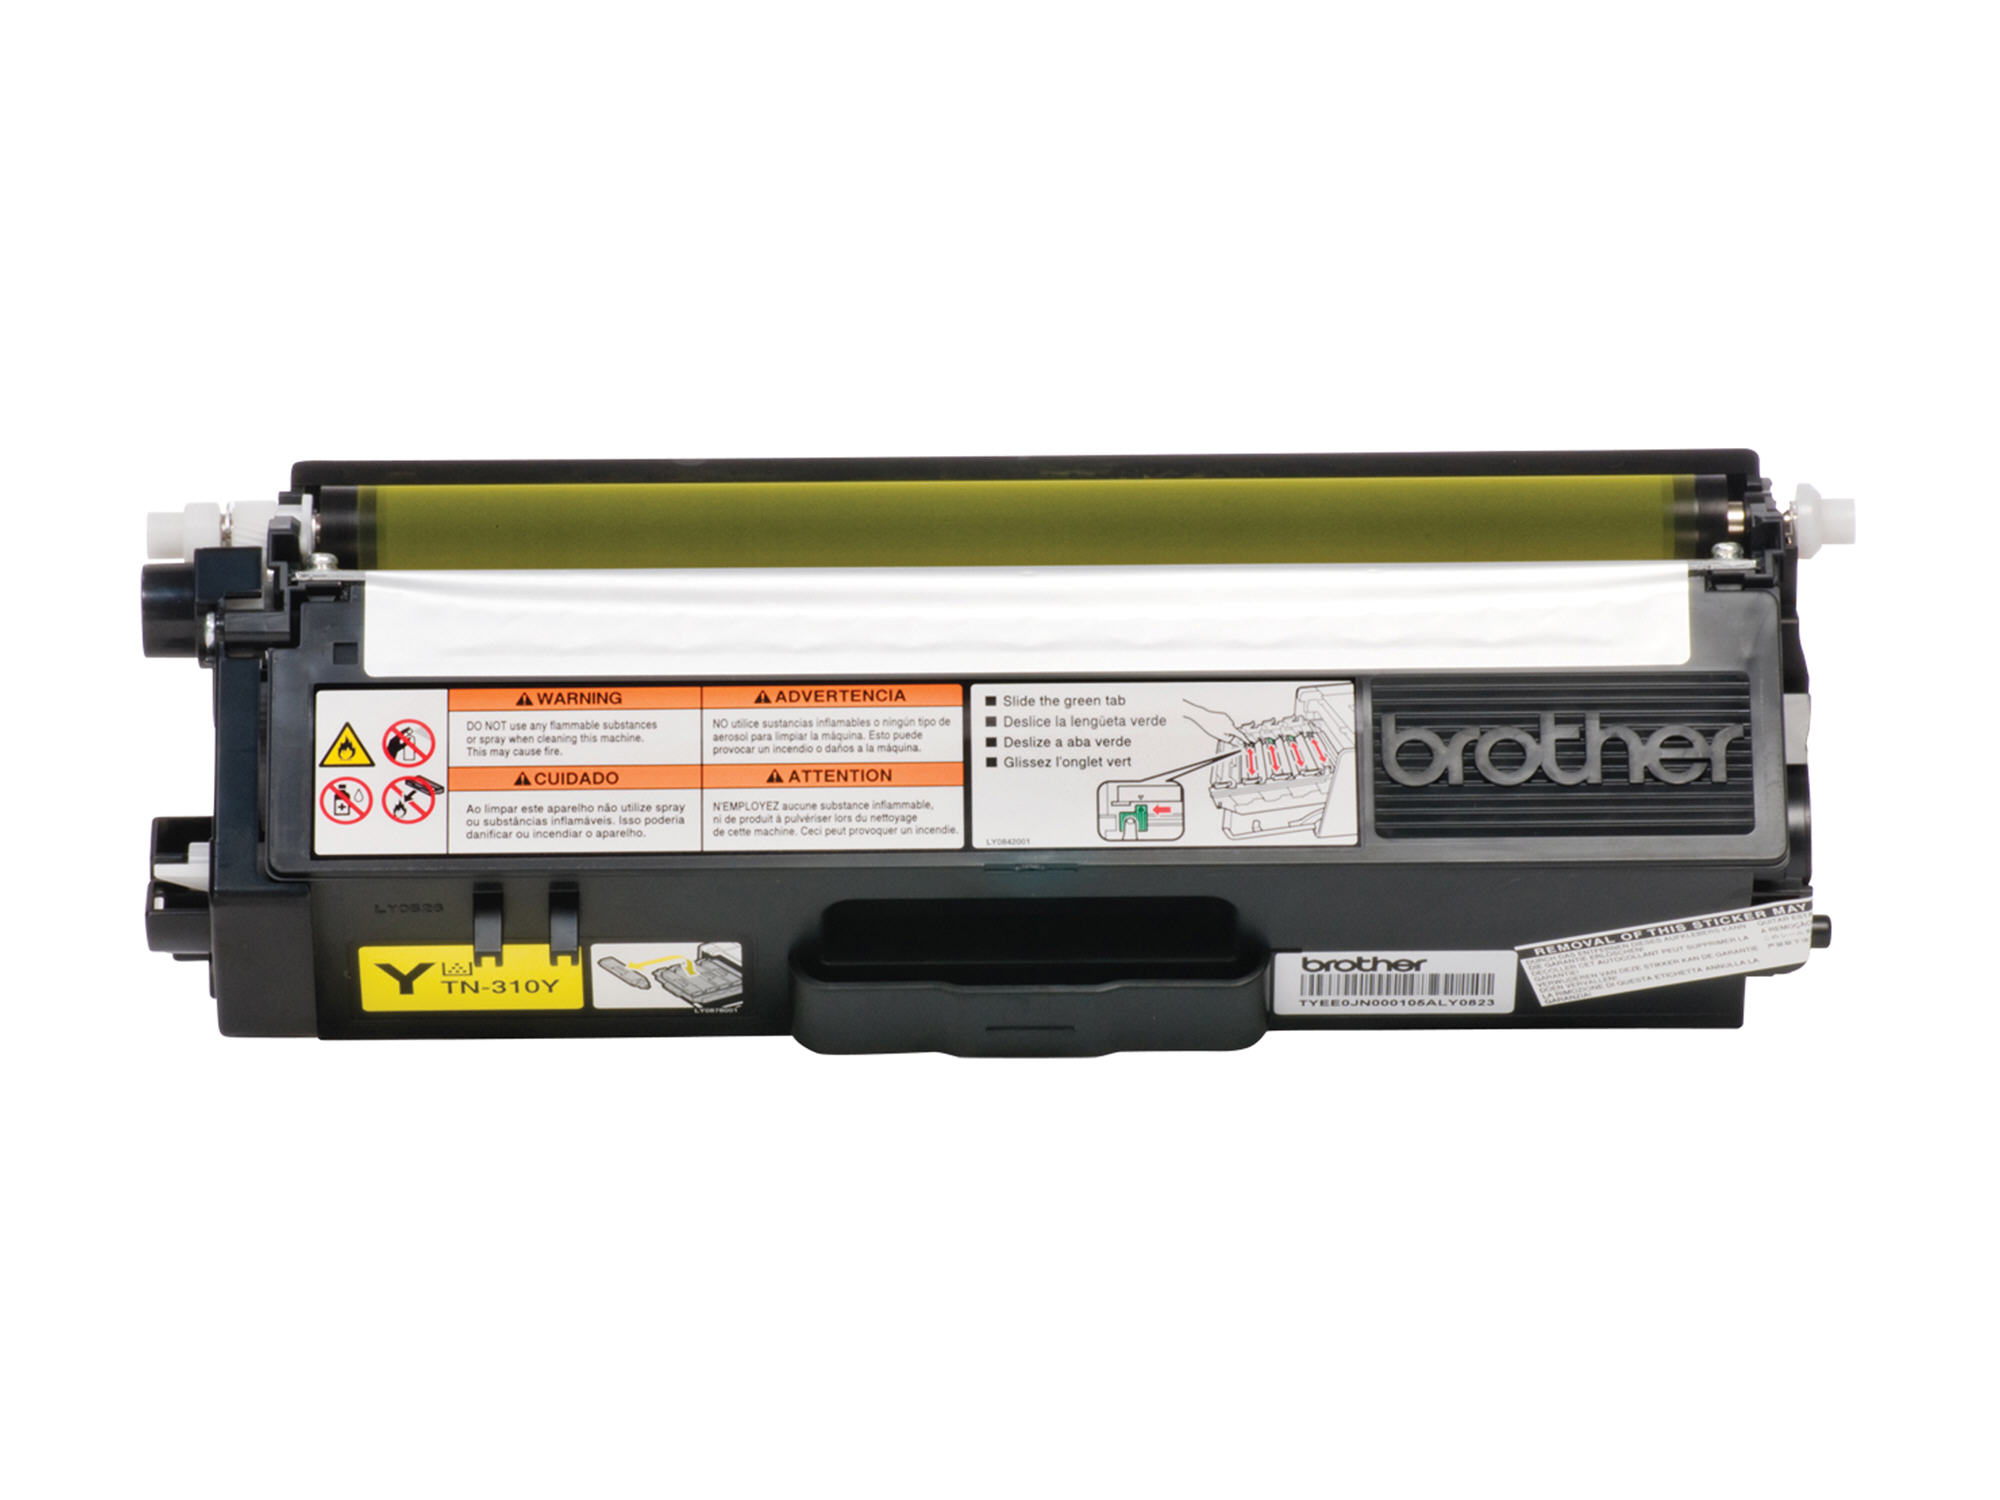 TN310Y TONER CARTRIDGE - YELLOW YELLOW TONER CARTRIDGE FOR HL4150CDN HL4570CDW HL4570CDWT Yellow Toner Cartridge (yields approx. 1,500 pages in accordance with ISO/IEC 19798 on letter/A4 size paper) Yellow Toner Cartridge (yields approx. 1,500 pages in accordance with ISO/IEC 19798 on letter/A4 size paper),DCP-9050CDN, DCP-9055CDN, DCP-9270CDN, HL-4140CN, H Yellow Toner Cartridge (yields approx. 1,500 pages),Compatible Brother models: DCP-9050CDN, DCP-9055CDN, DCP-9270CDN, HL-4140CN, HL-4150CDN, HL-4570CDW, HL-4570